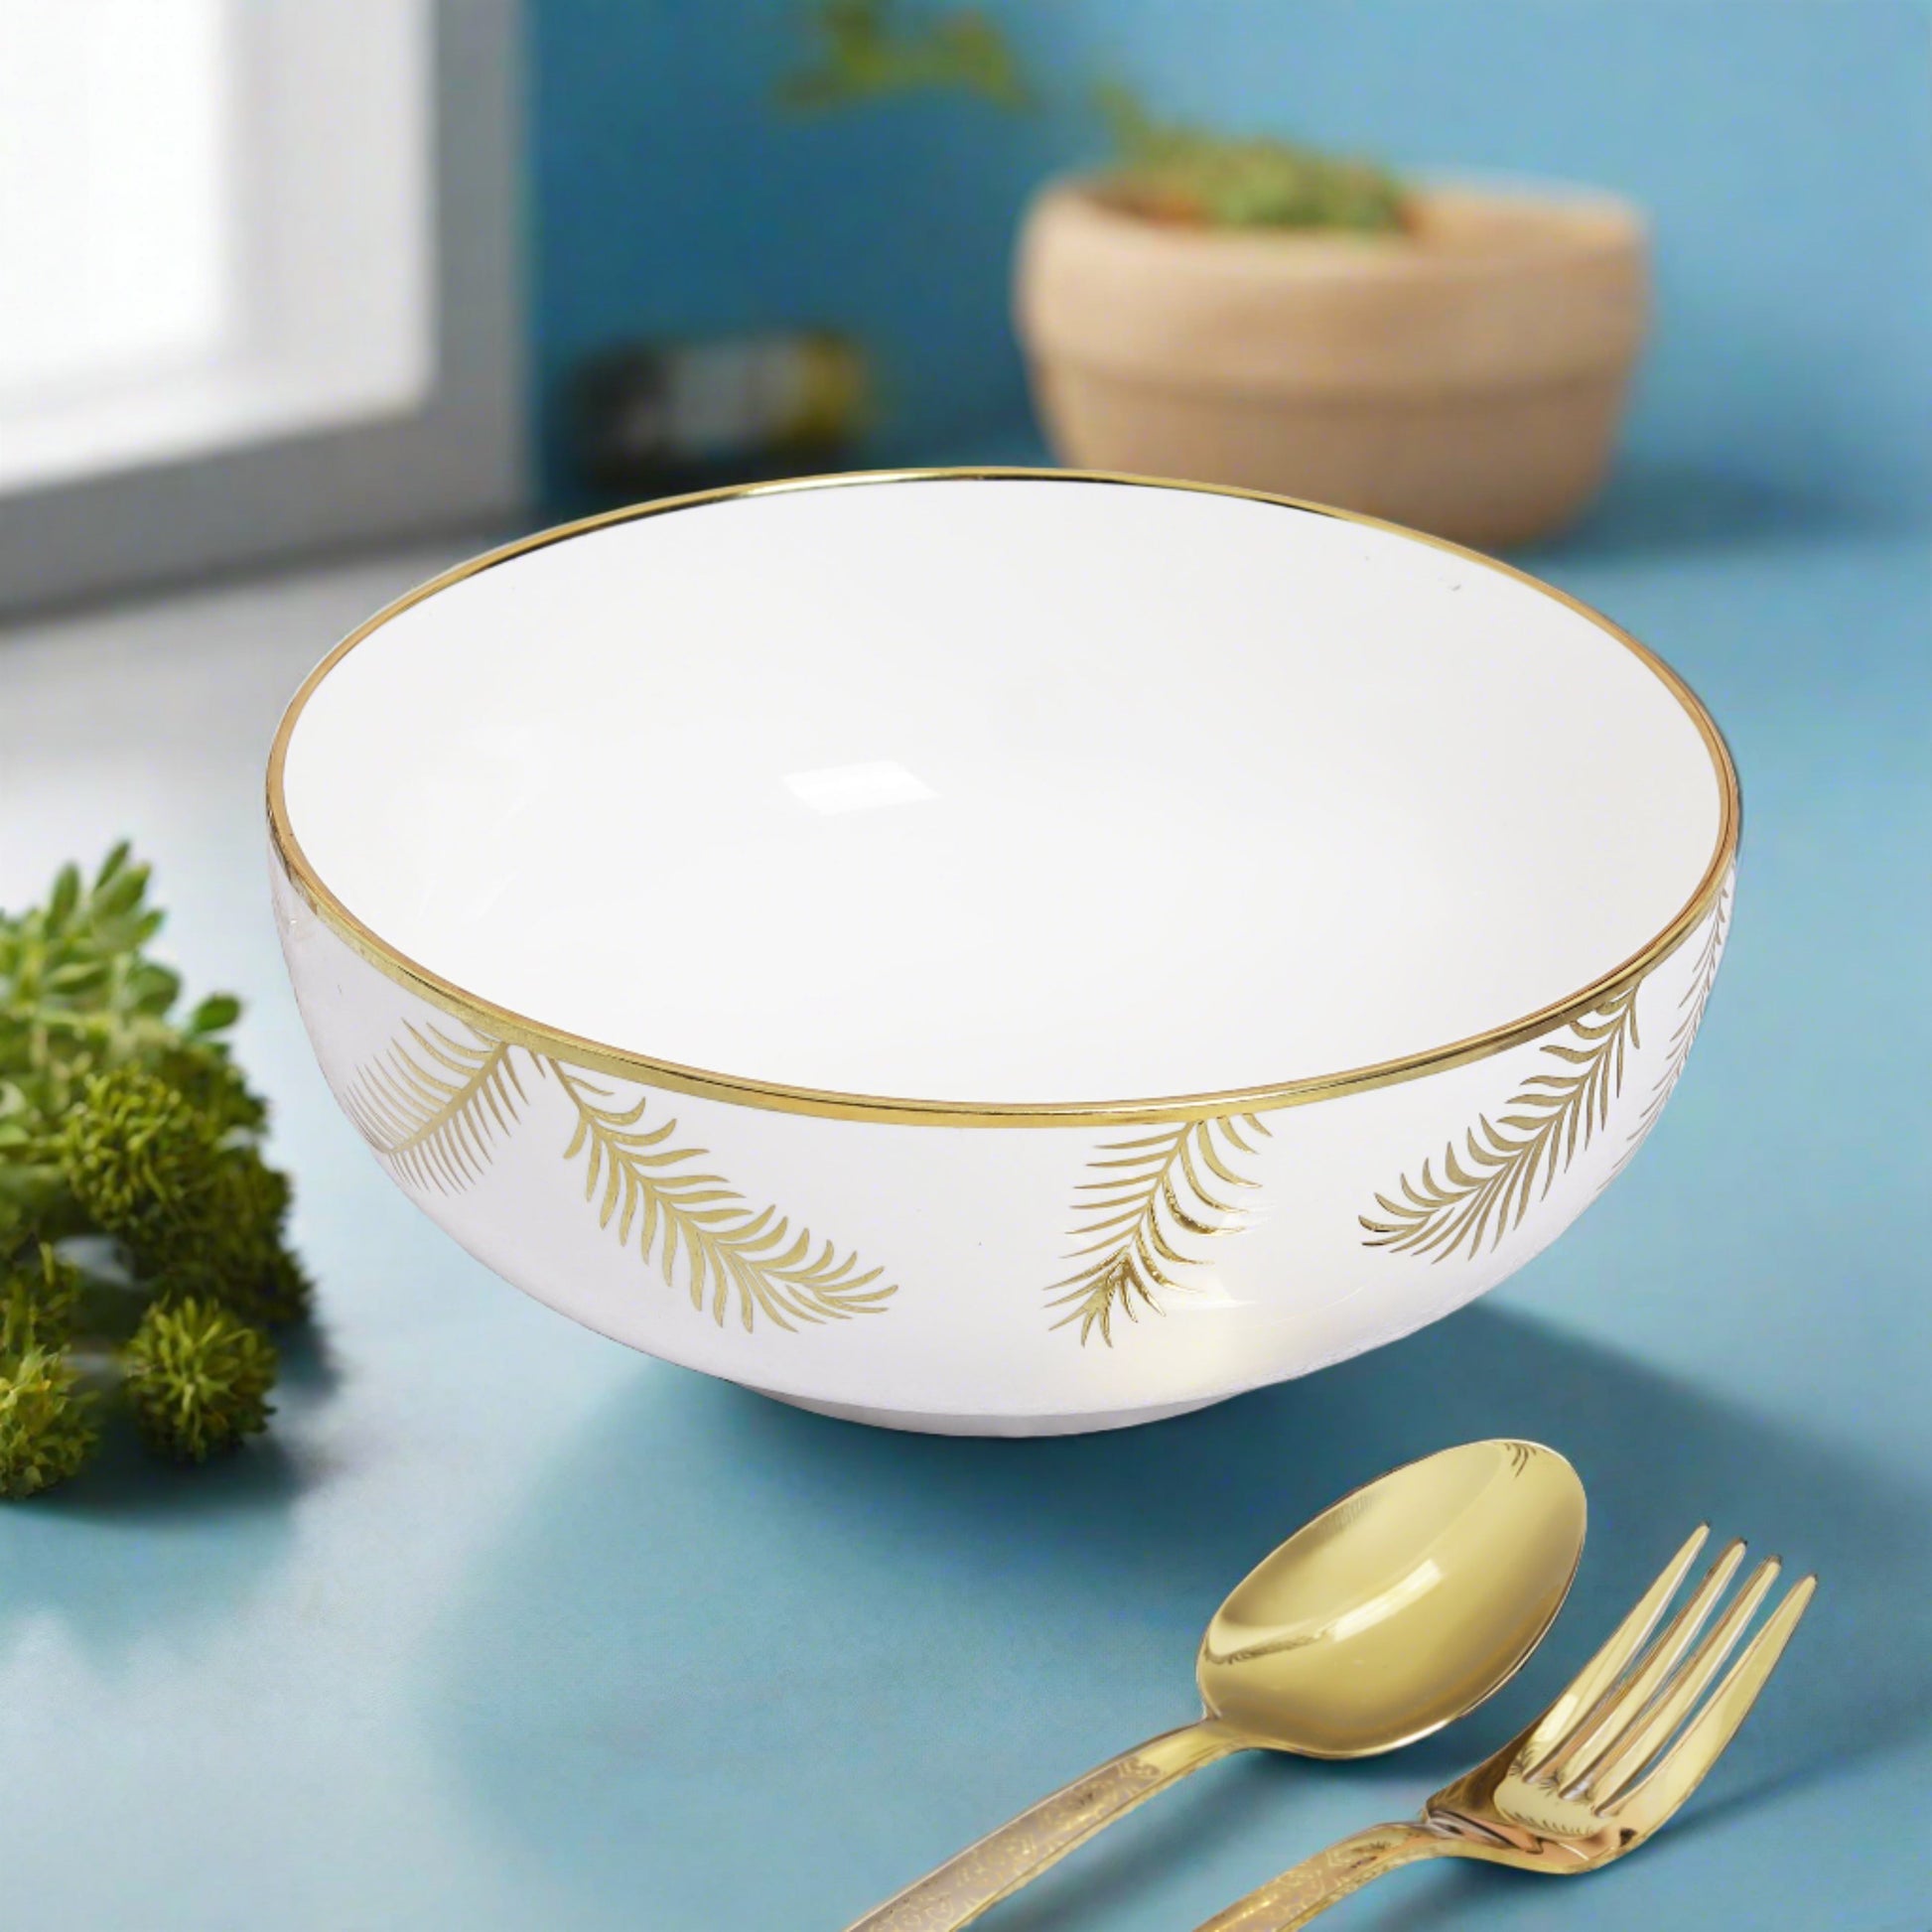 Large ceramic serving bowl, perfect for salads or side dishes - a functional and elegant addition to your table.